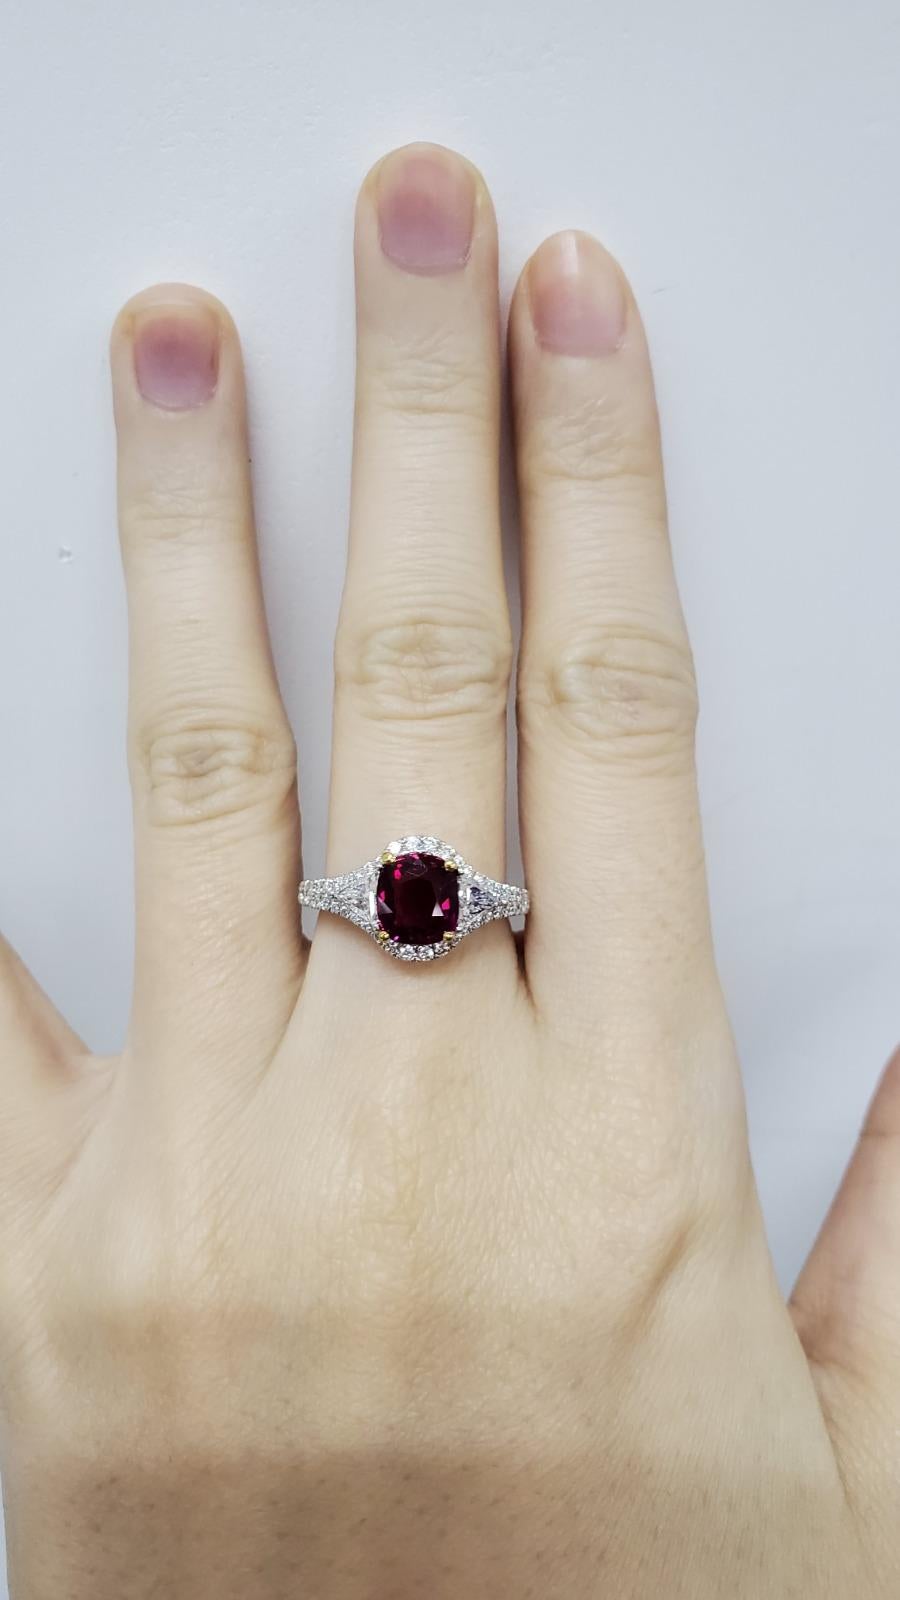 Art Deco 2.02 Carat Unheated Intense Red Cushion Natural Ruby 'Mozambique' Ring Certified For Sale